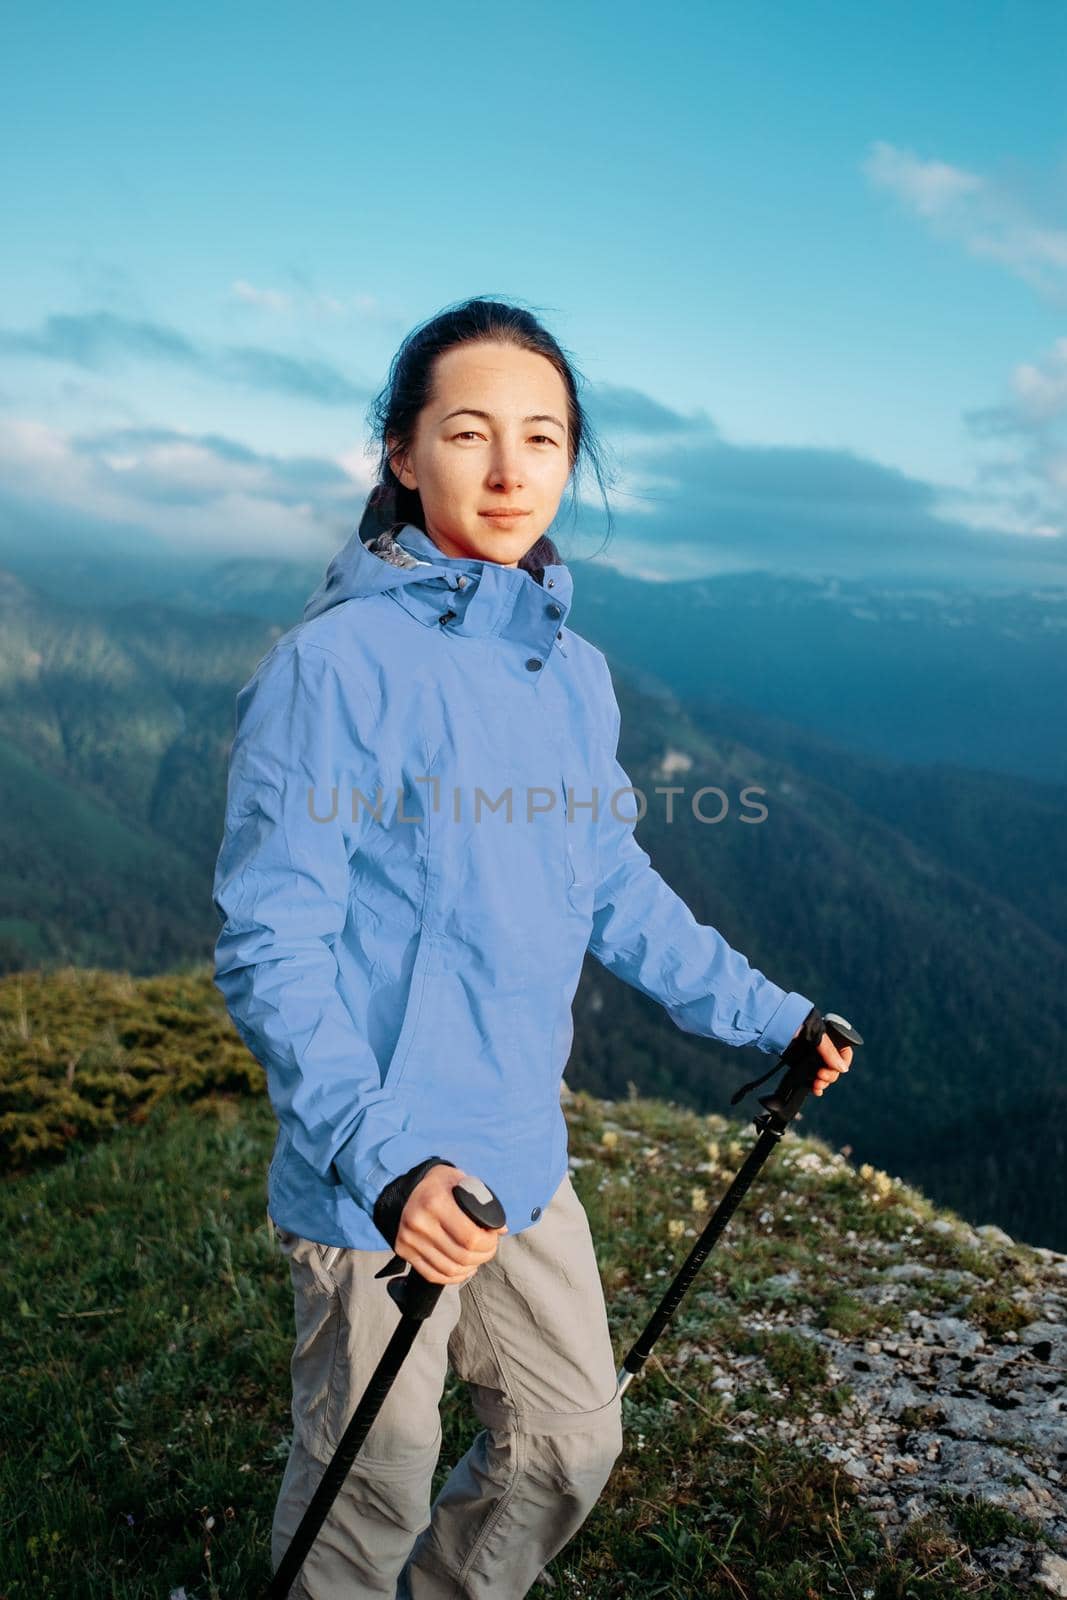 Outdoor explorer young woman standing in the mountains and looking at camera.